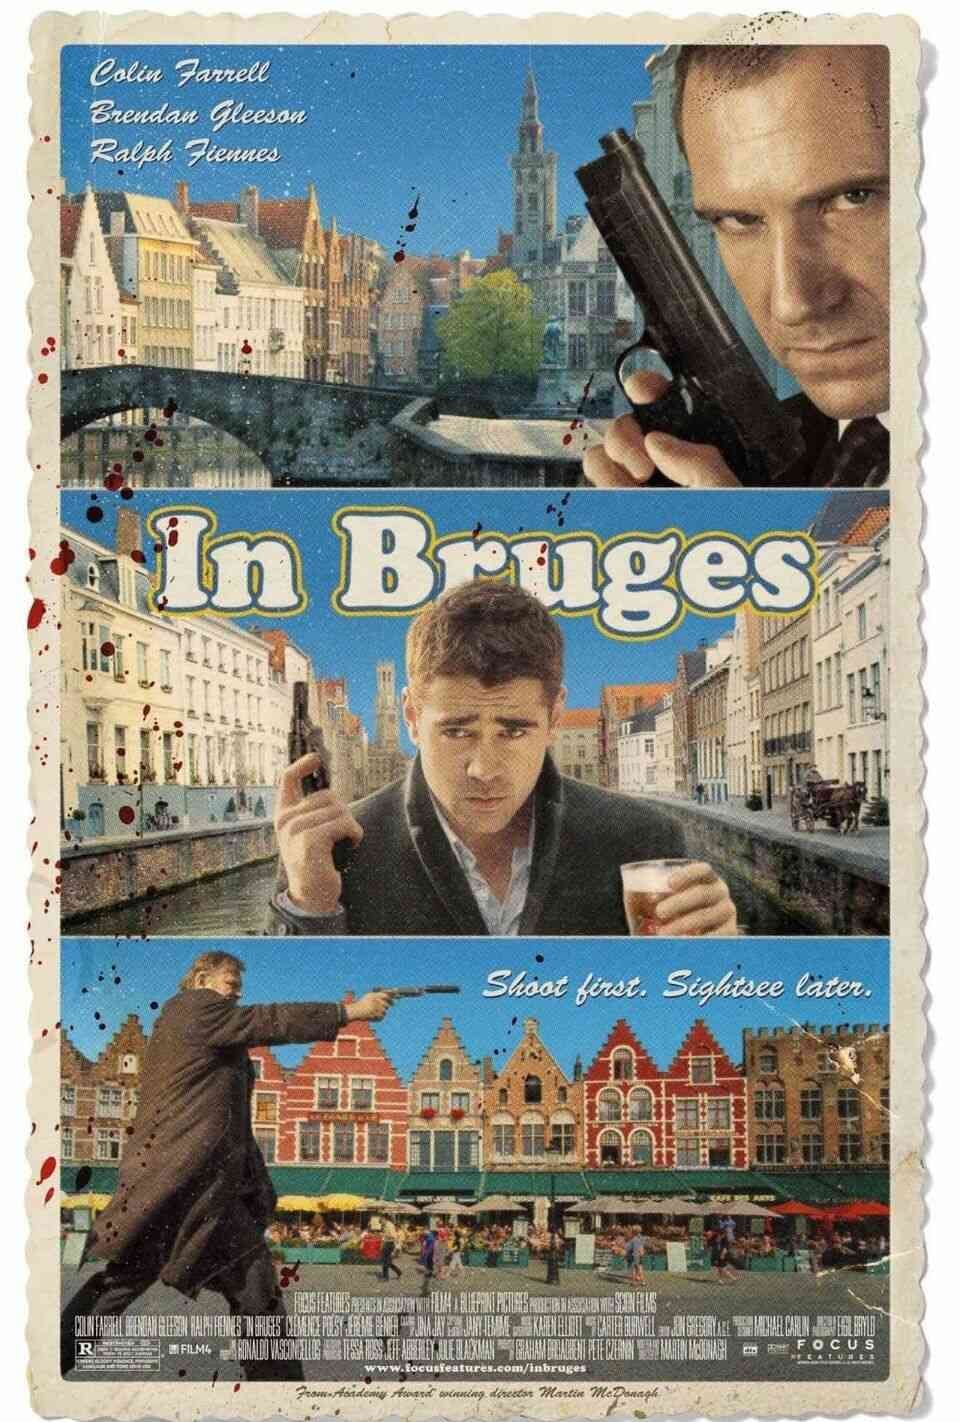 Read In Bruges screenplay (poster)